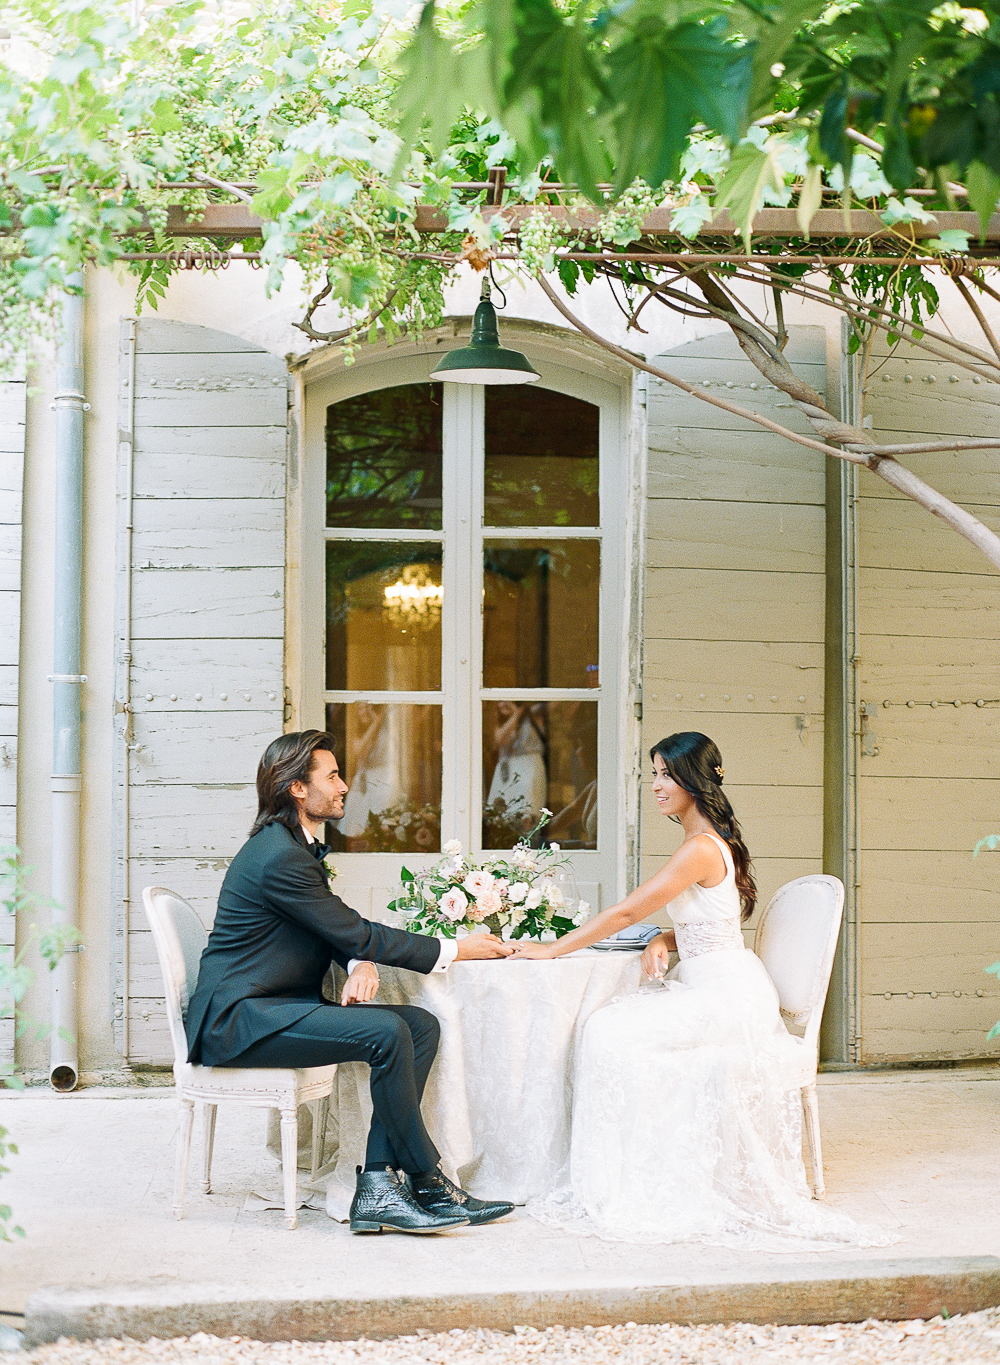 Organic Luxe Elopement Inspiration Alicia Yarrish Photography26